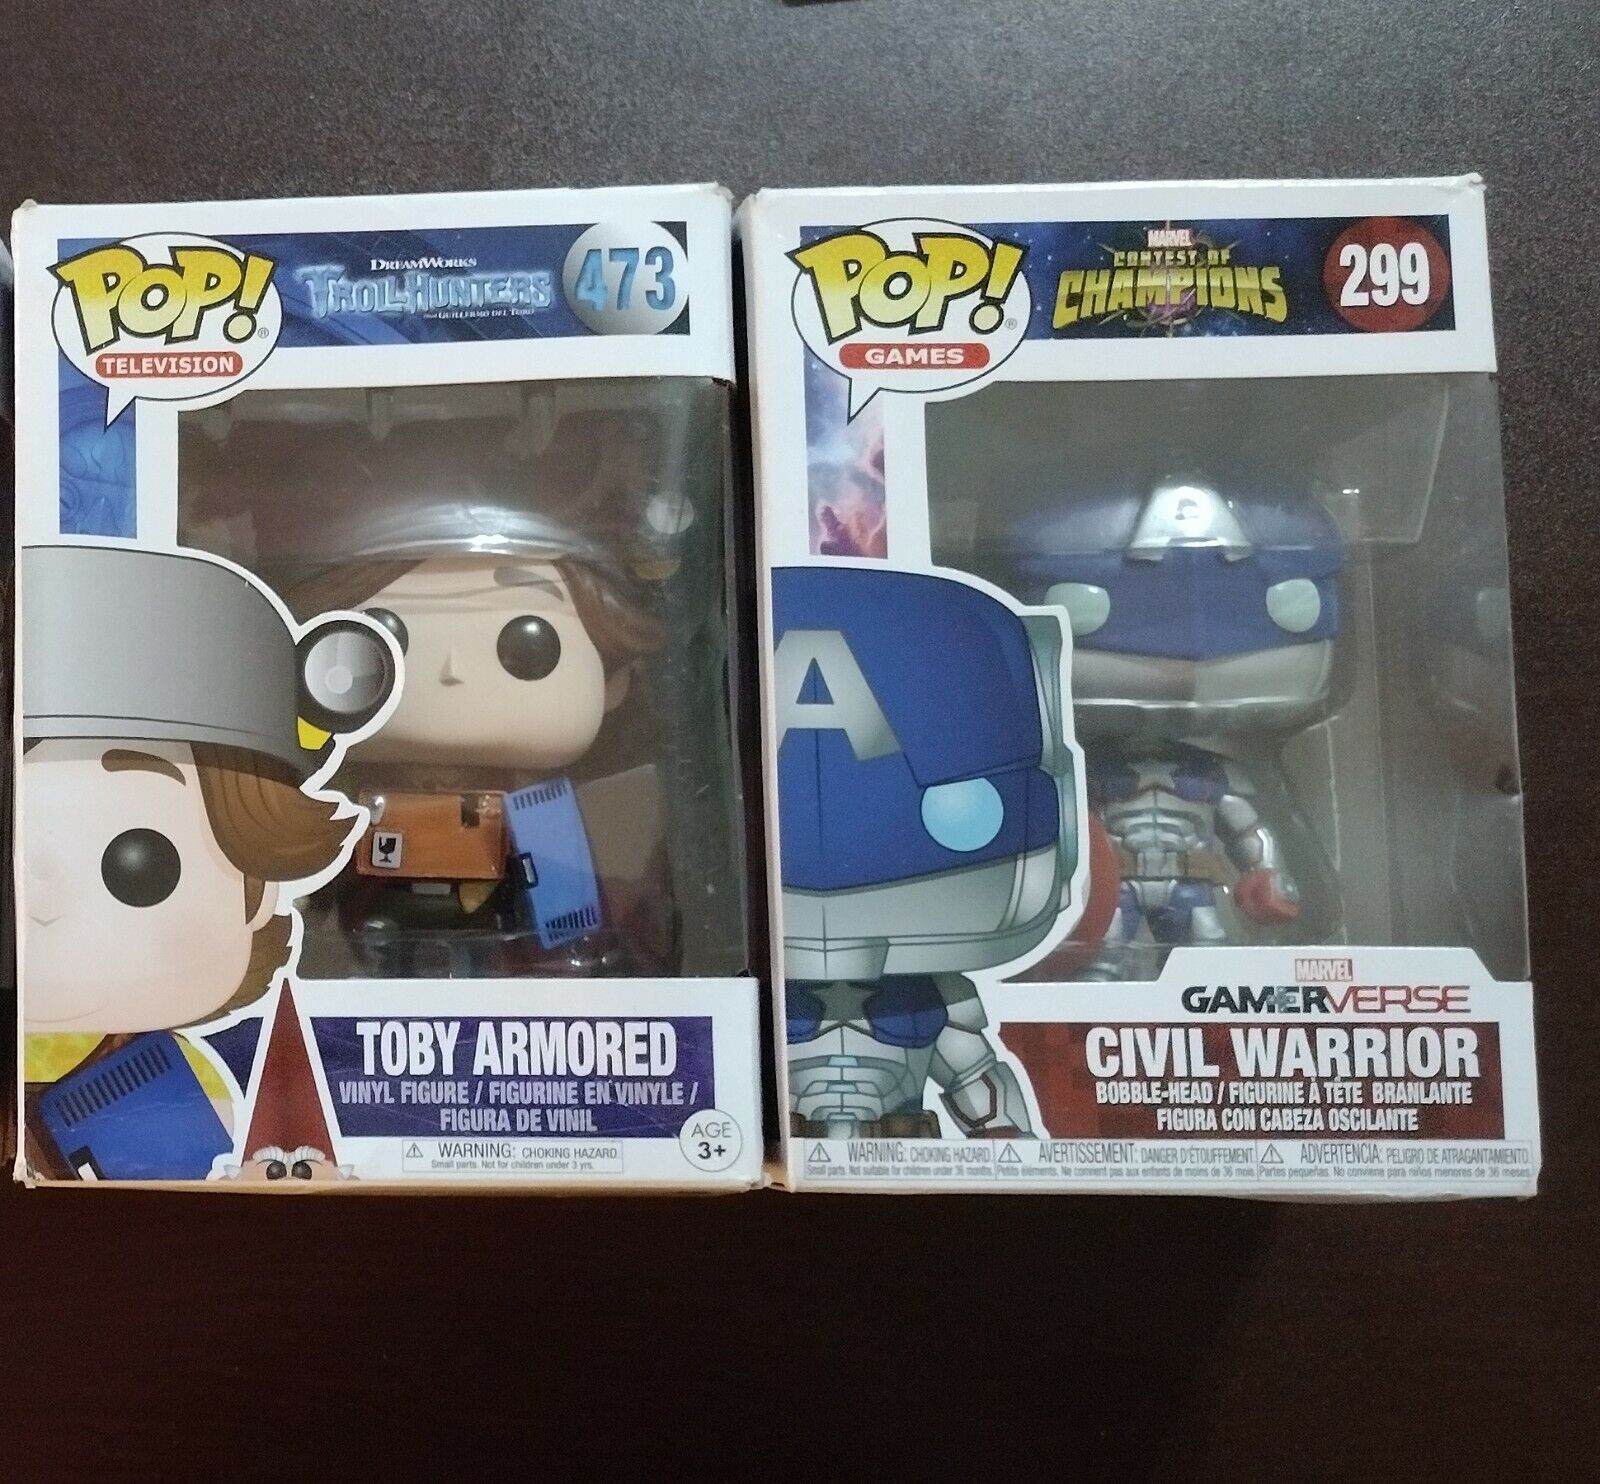 (1) Funko Pop Television/Games Collection - 473 Toby Armored & 299 Civil Warrior